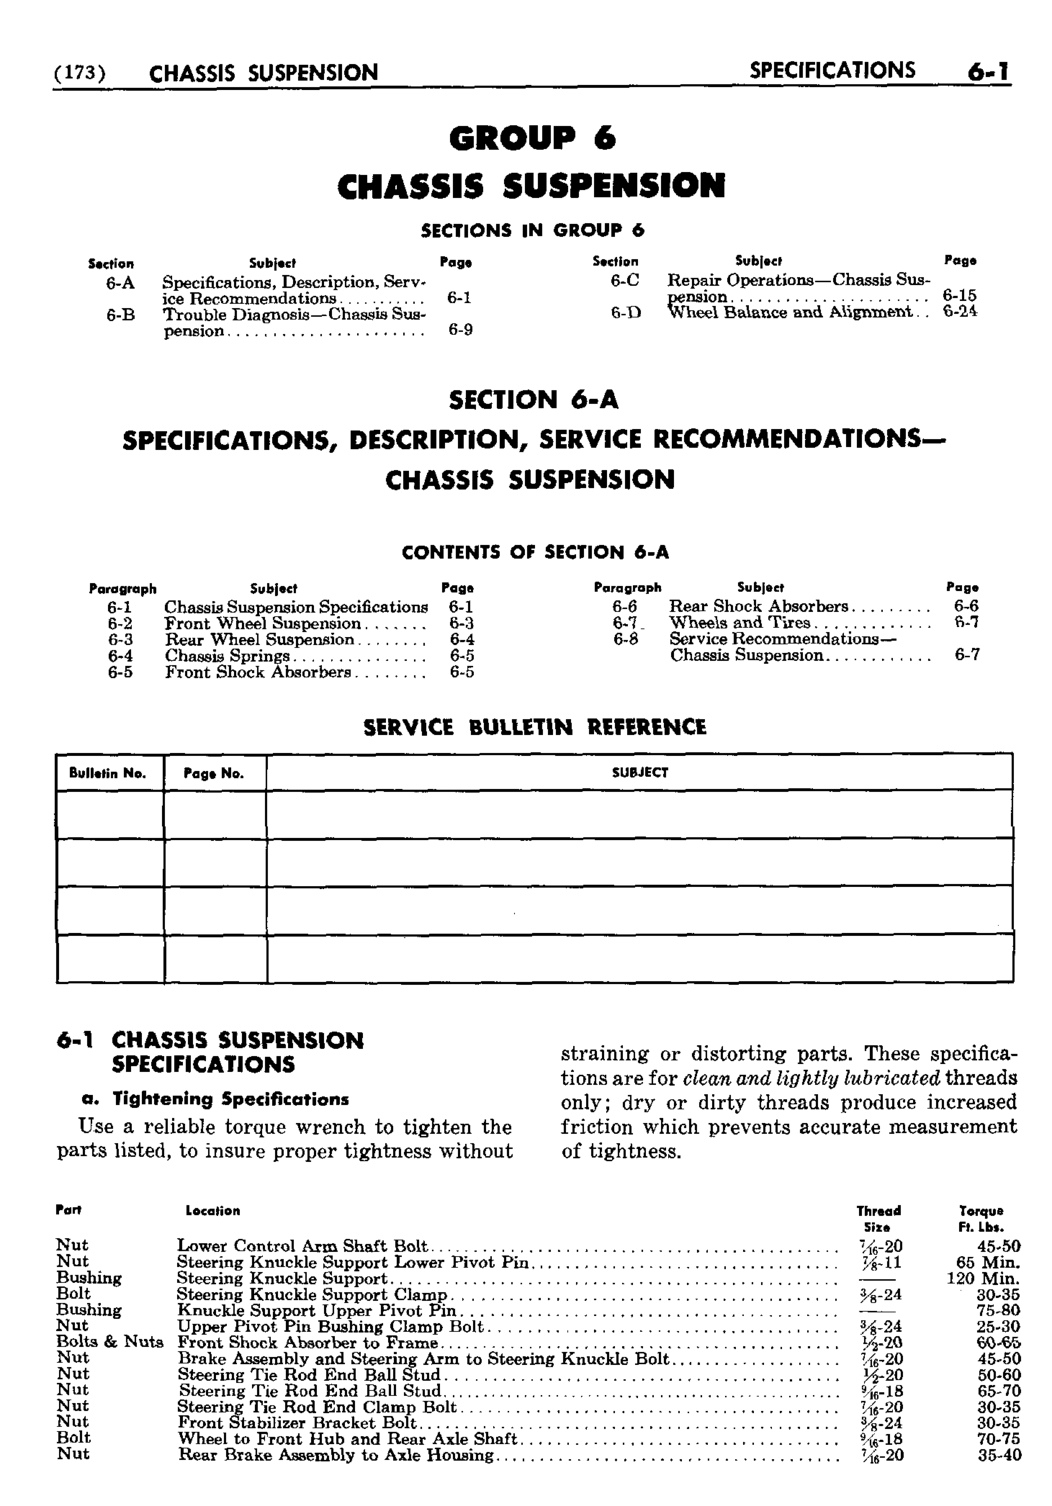 n_07 1950 Buick Shop Manual - Chassis Suspension-001-001.jpg